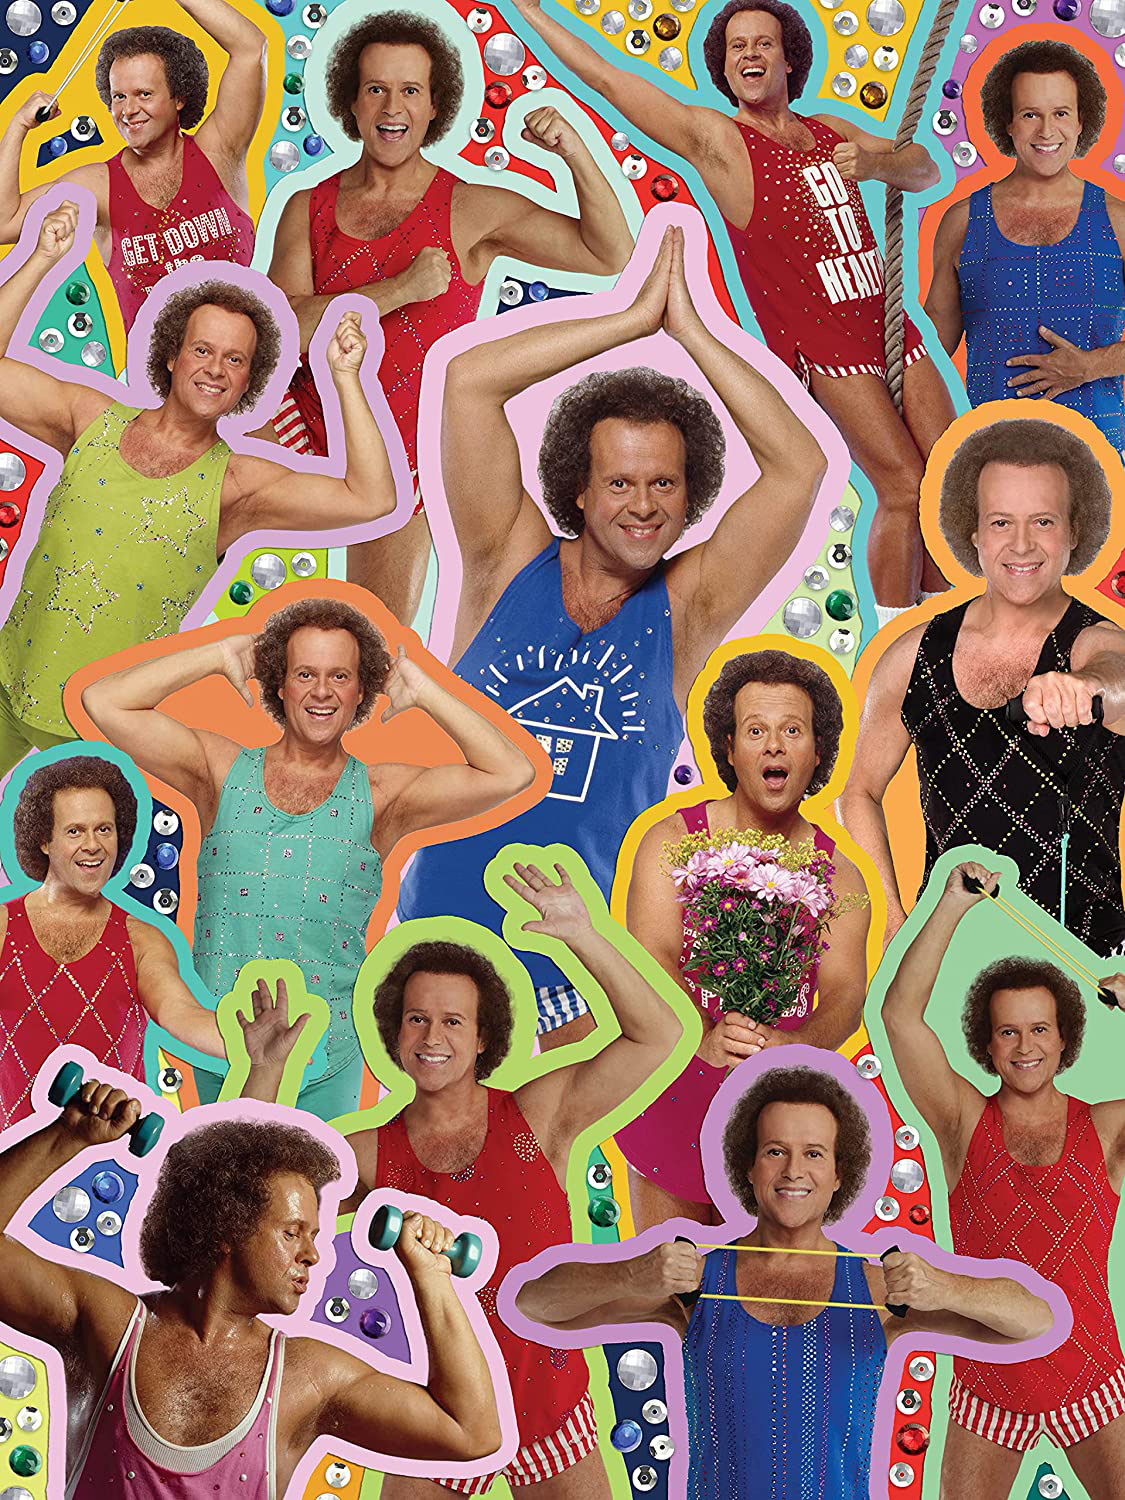 Richard Simmons - Bedazzled Collage Famous People Jigsaw Puzzle